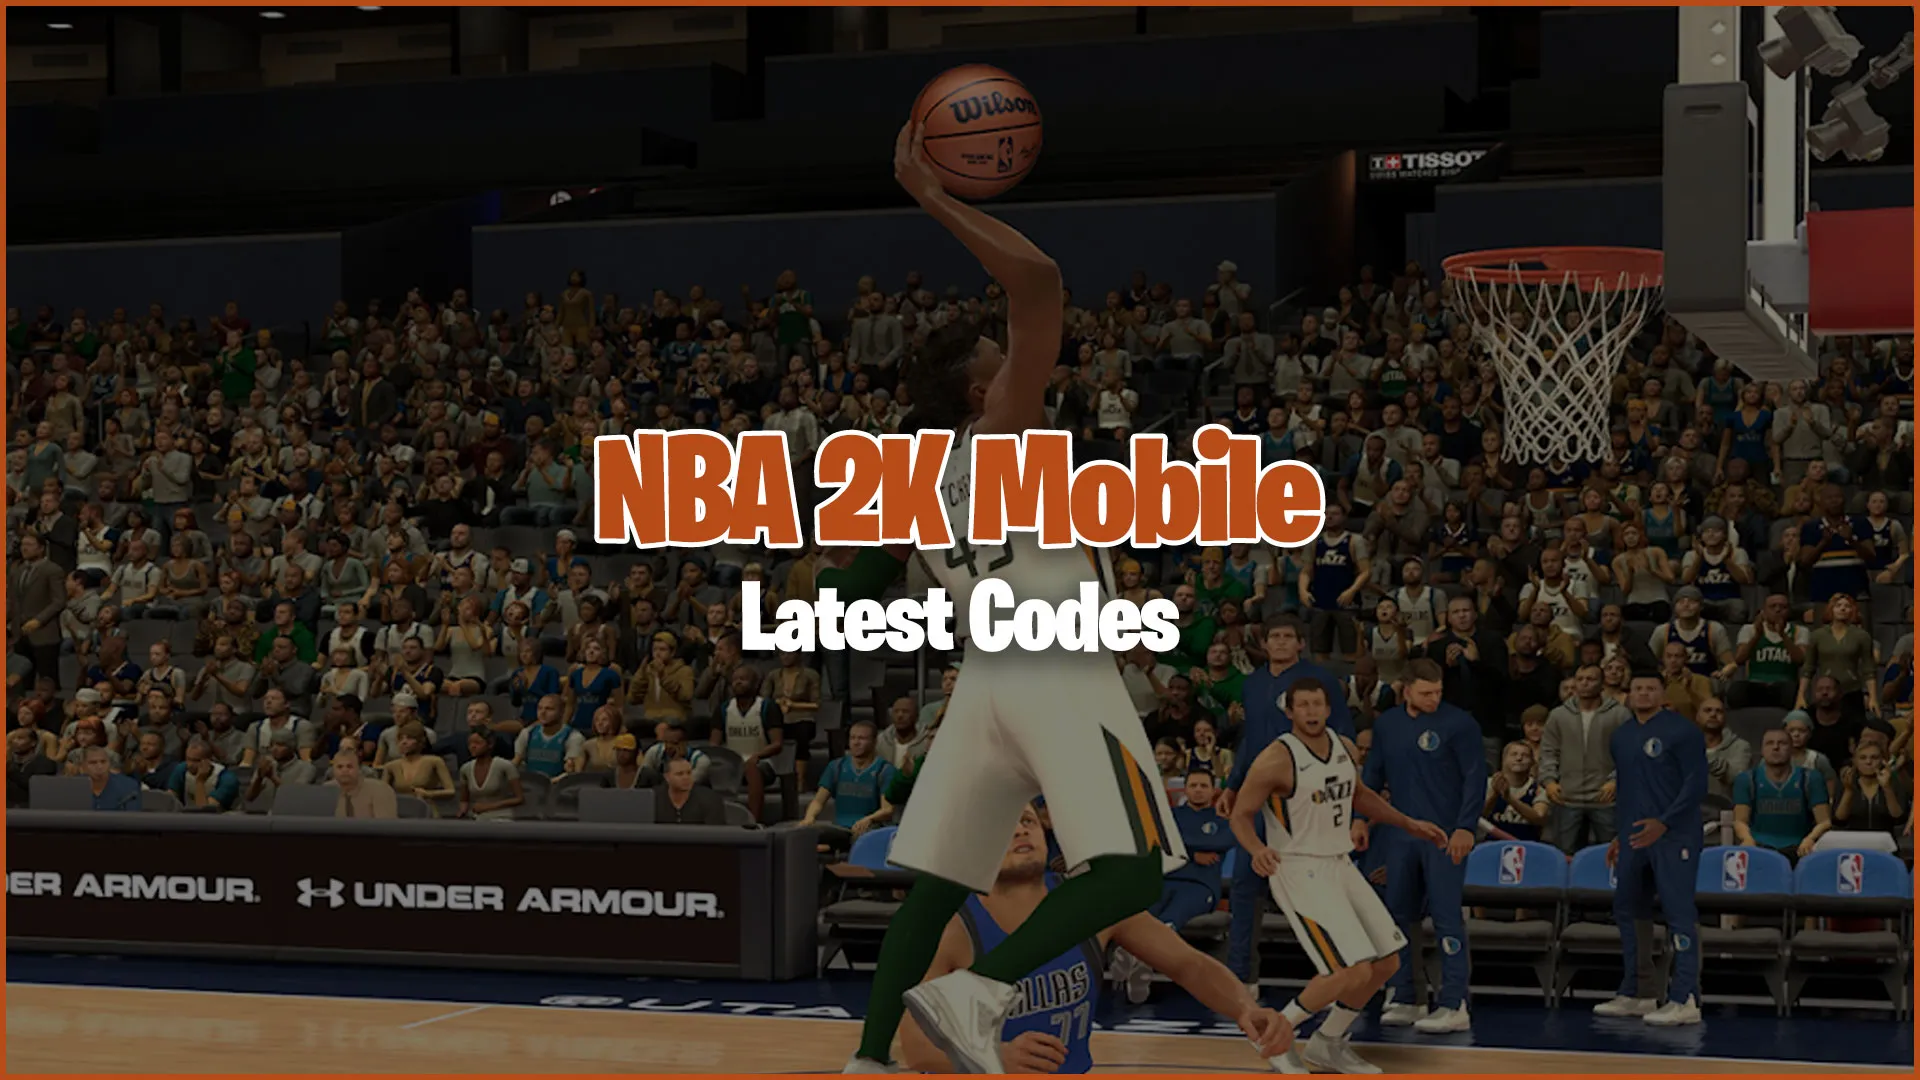 Nba 2k mobile codes that never expire